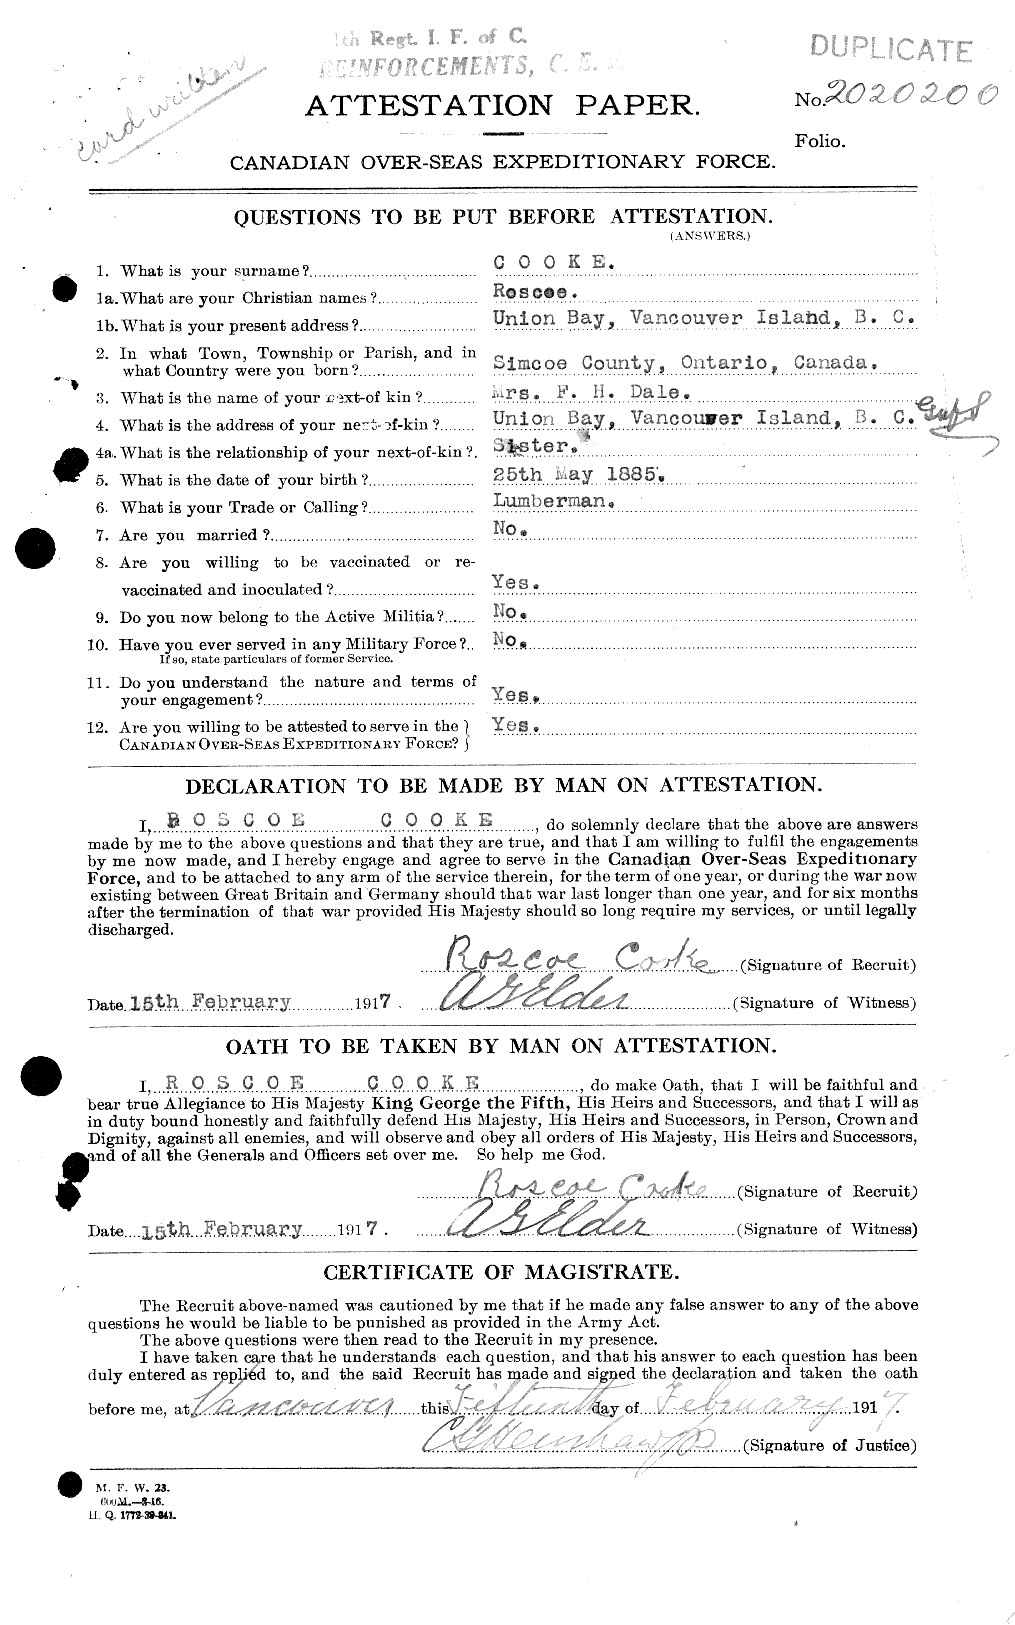 Personnel Records of the First World War - CEF 048954a